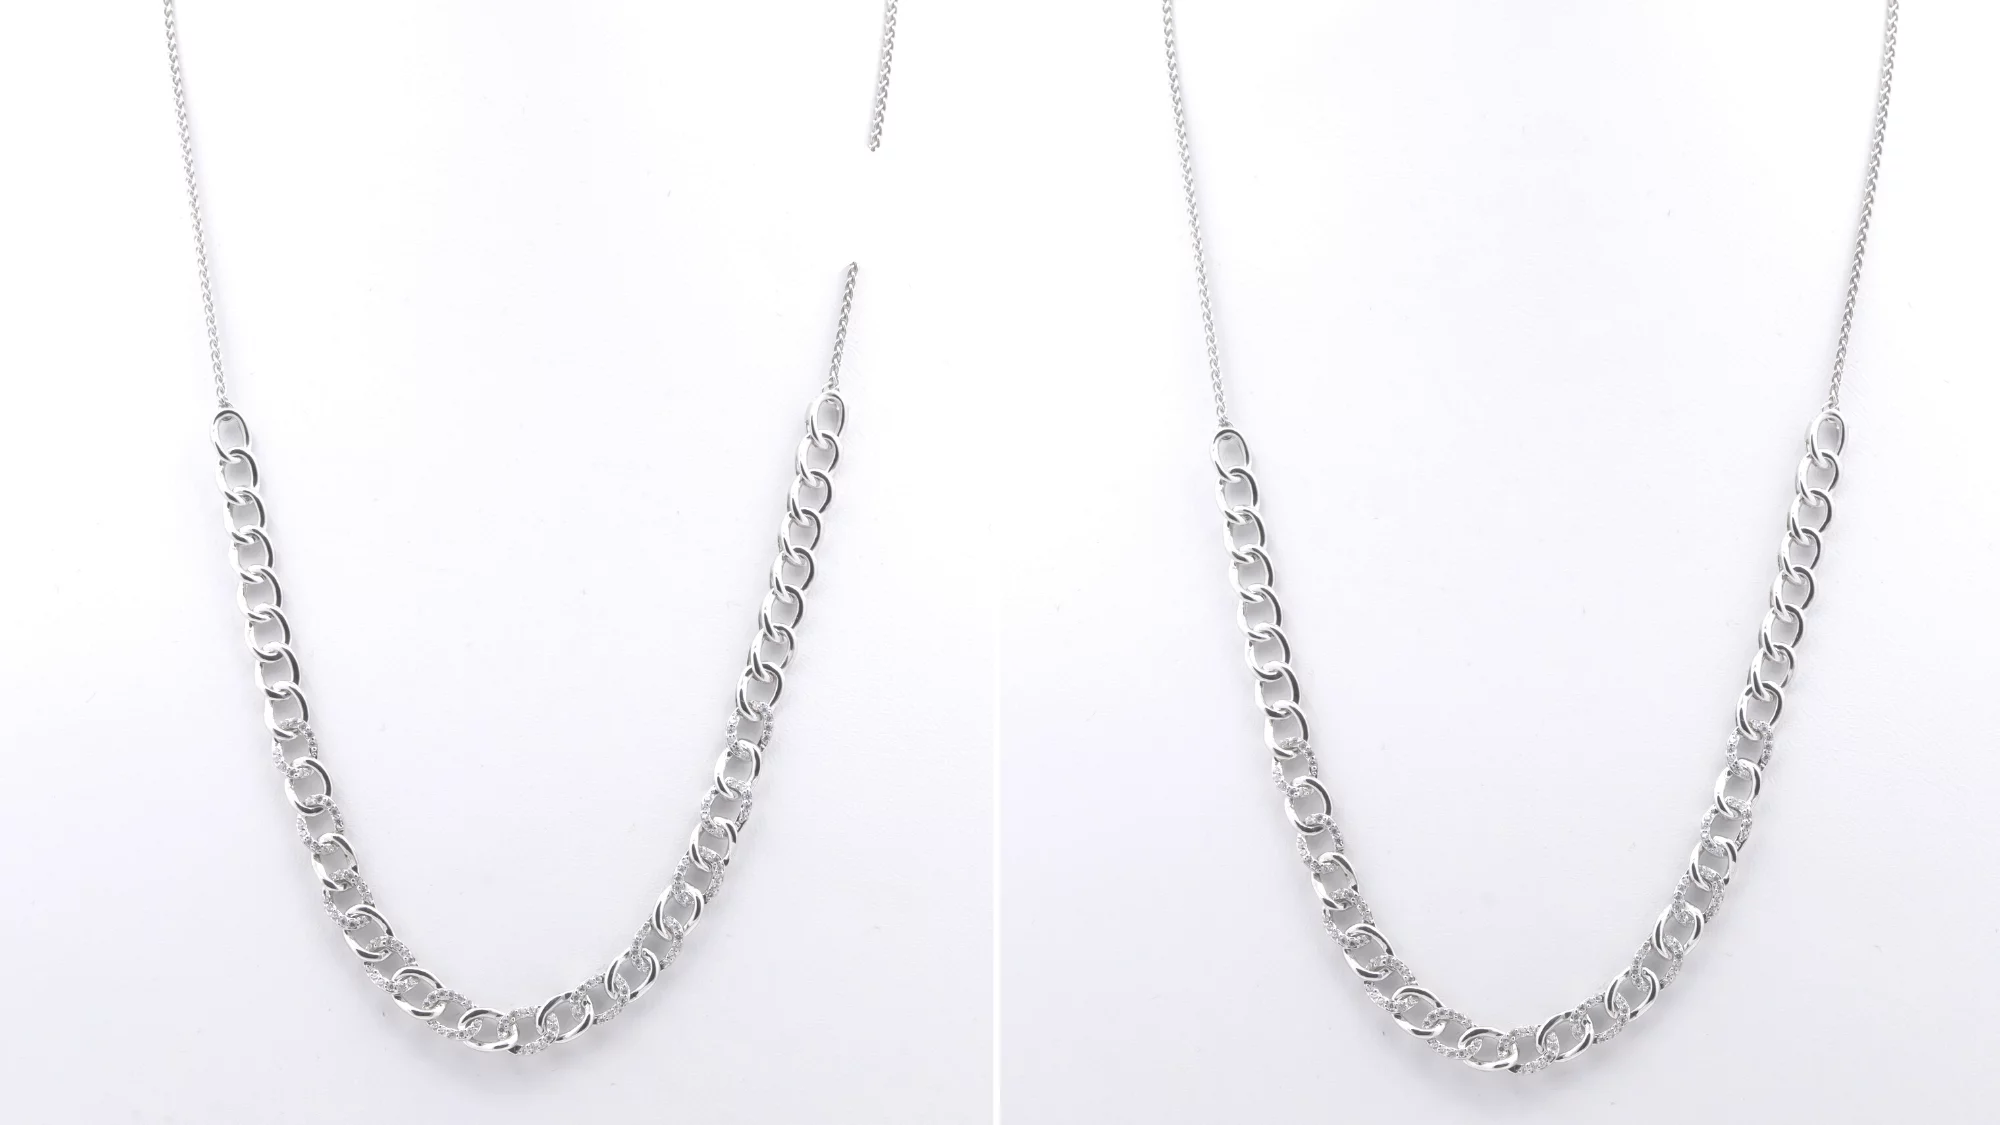 jewelry-chain-solder-repair-before-and-after